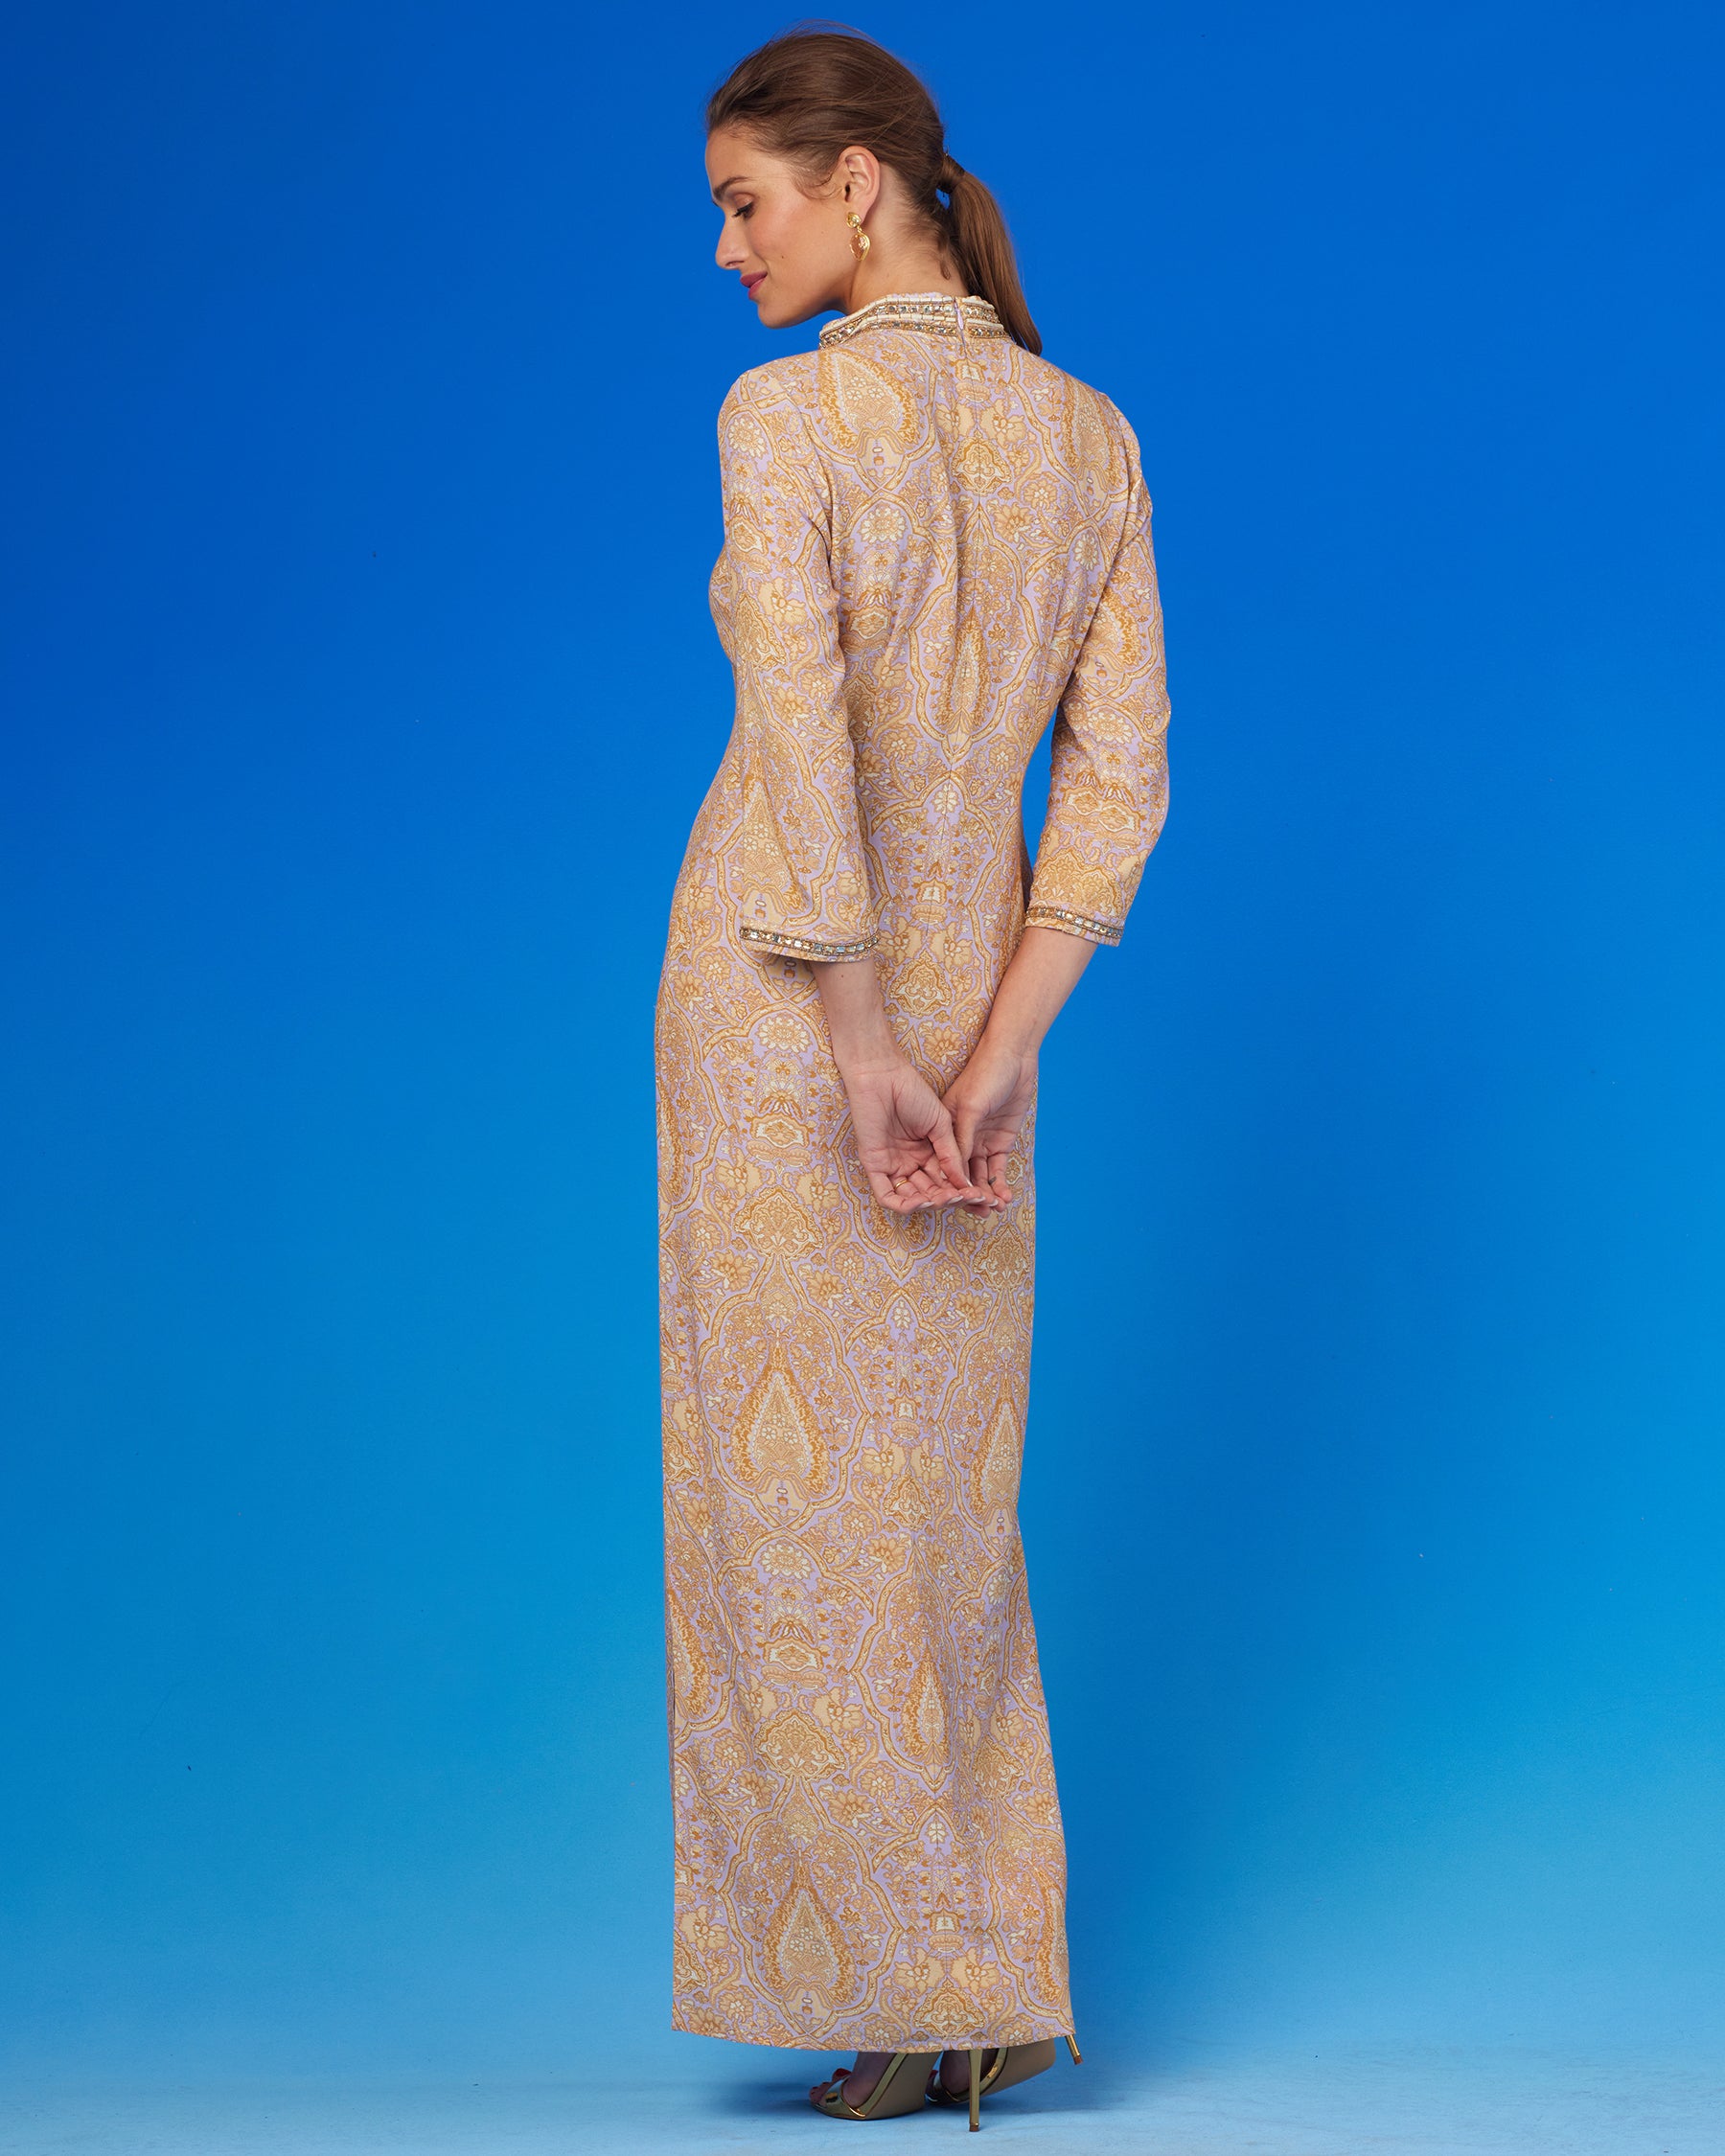 Laetitia Long Dress in Saffron on Lavender with Jewel Embellishment-Back View